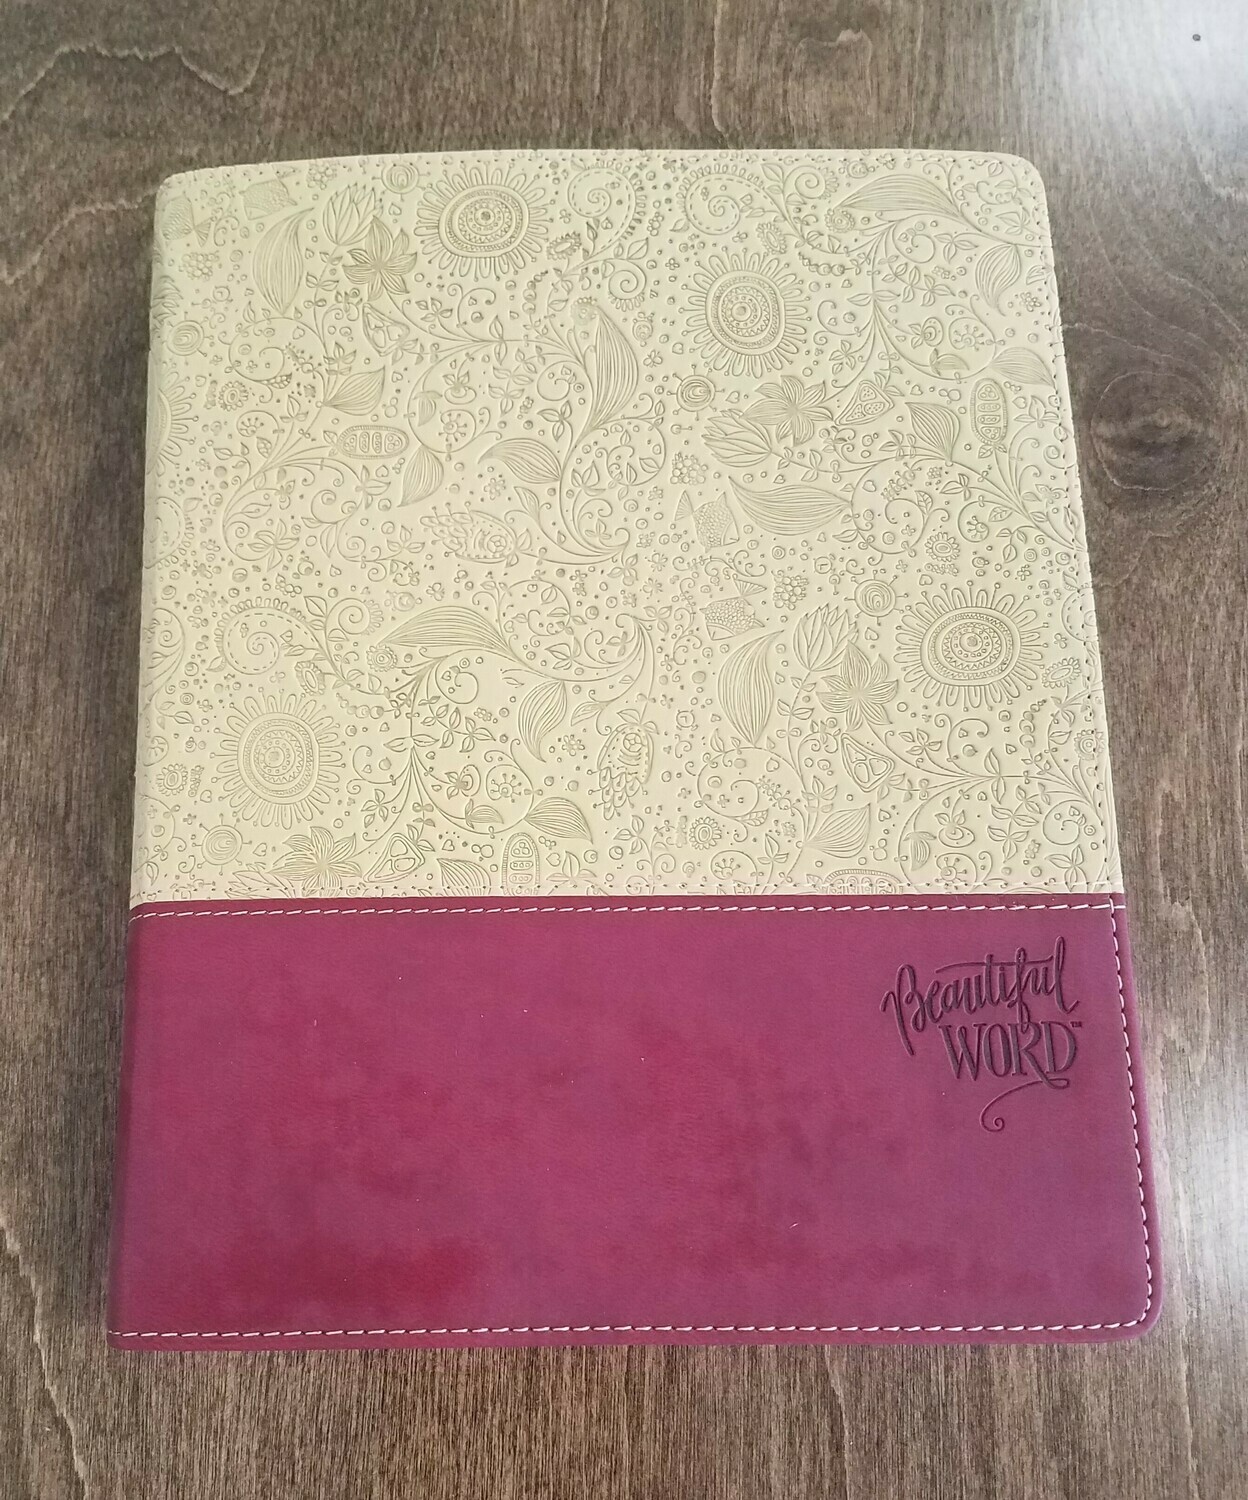 NIV Beautiful Word Bible - Softcover - Taupe/Cranberry Color